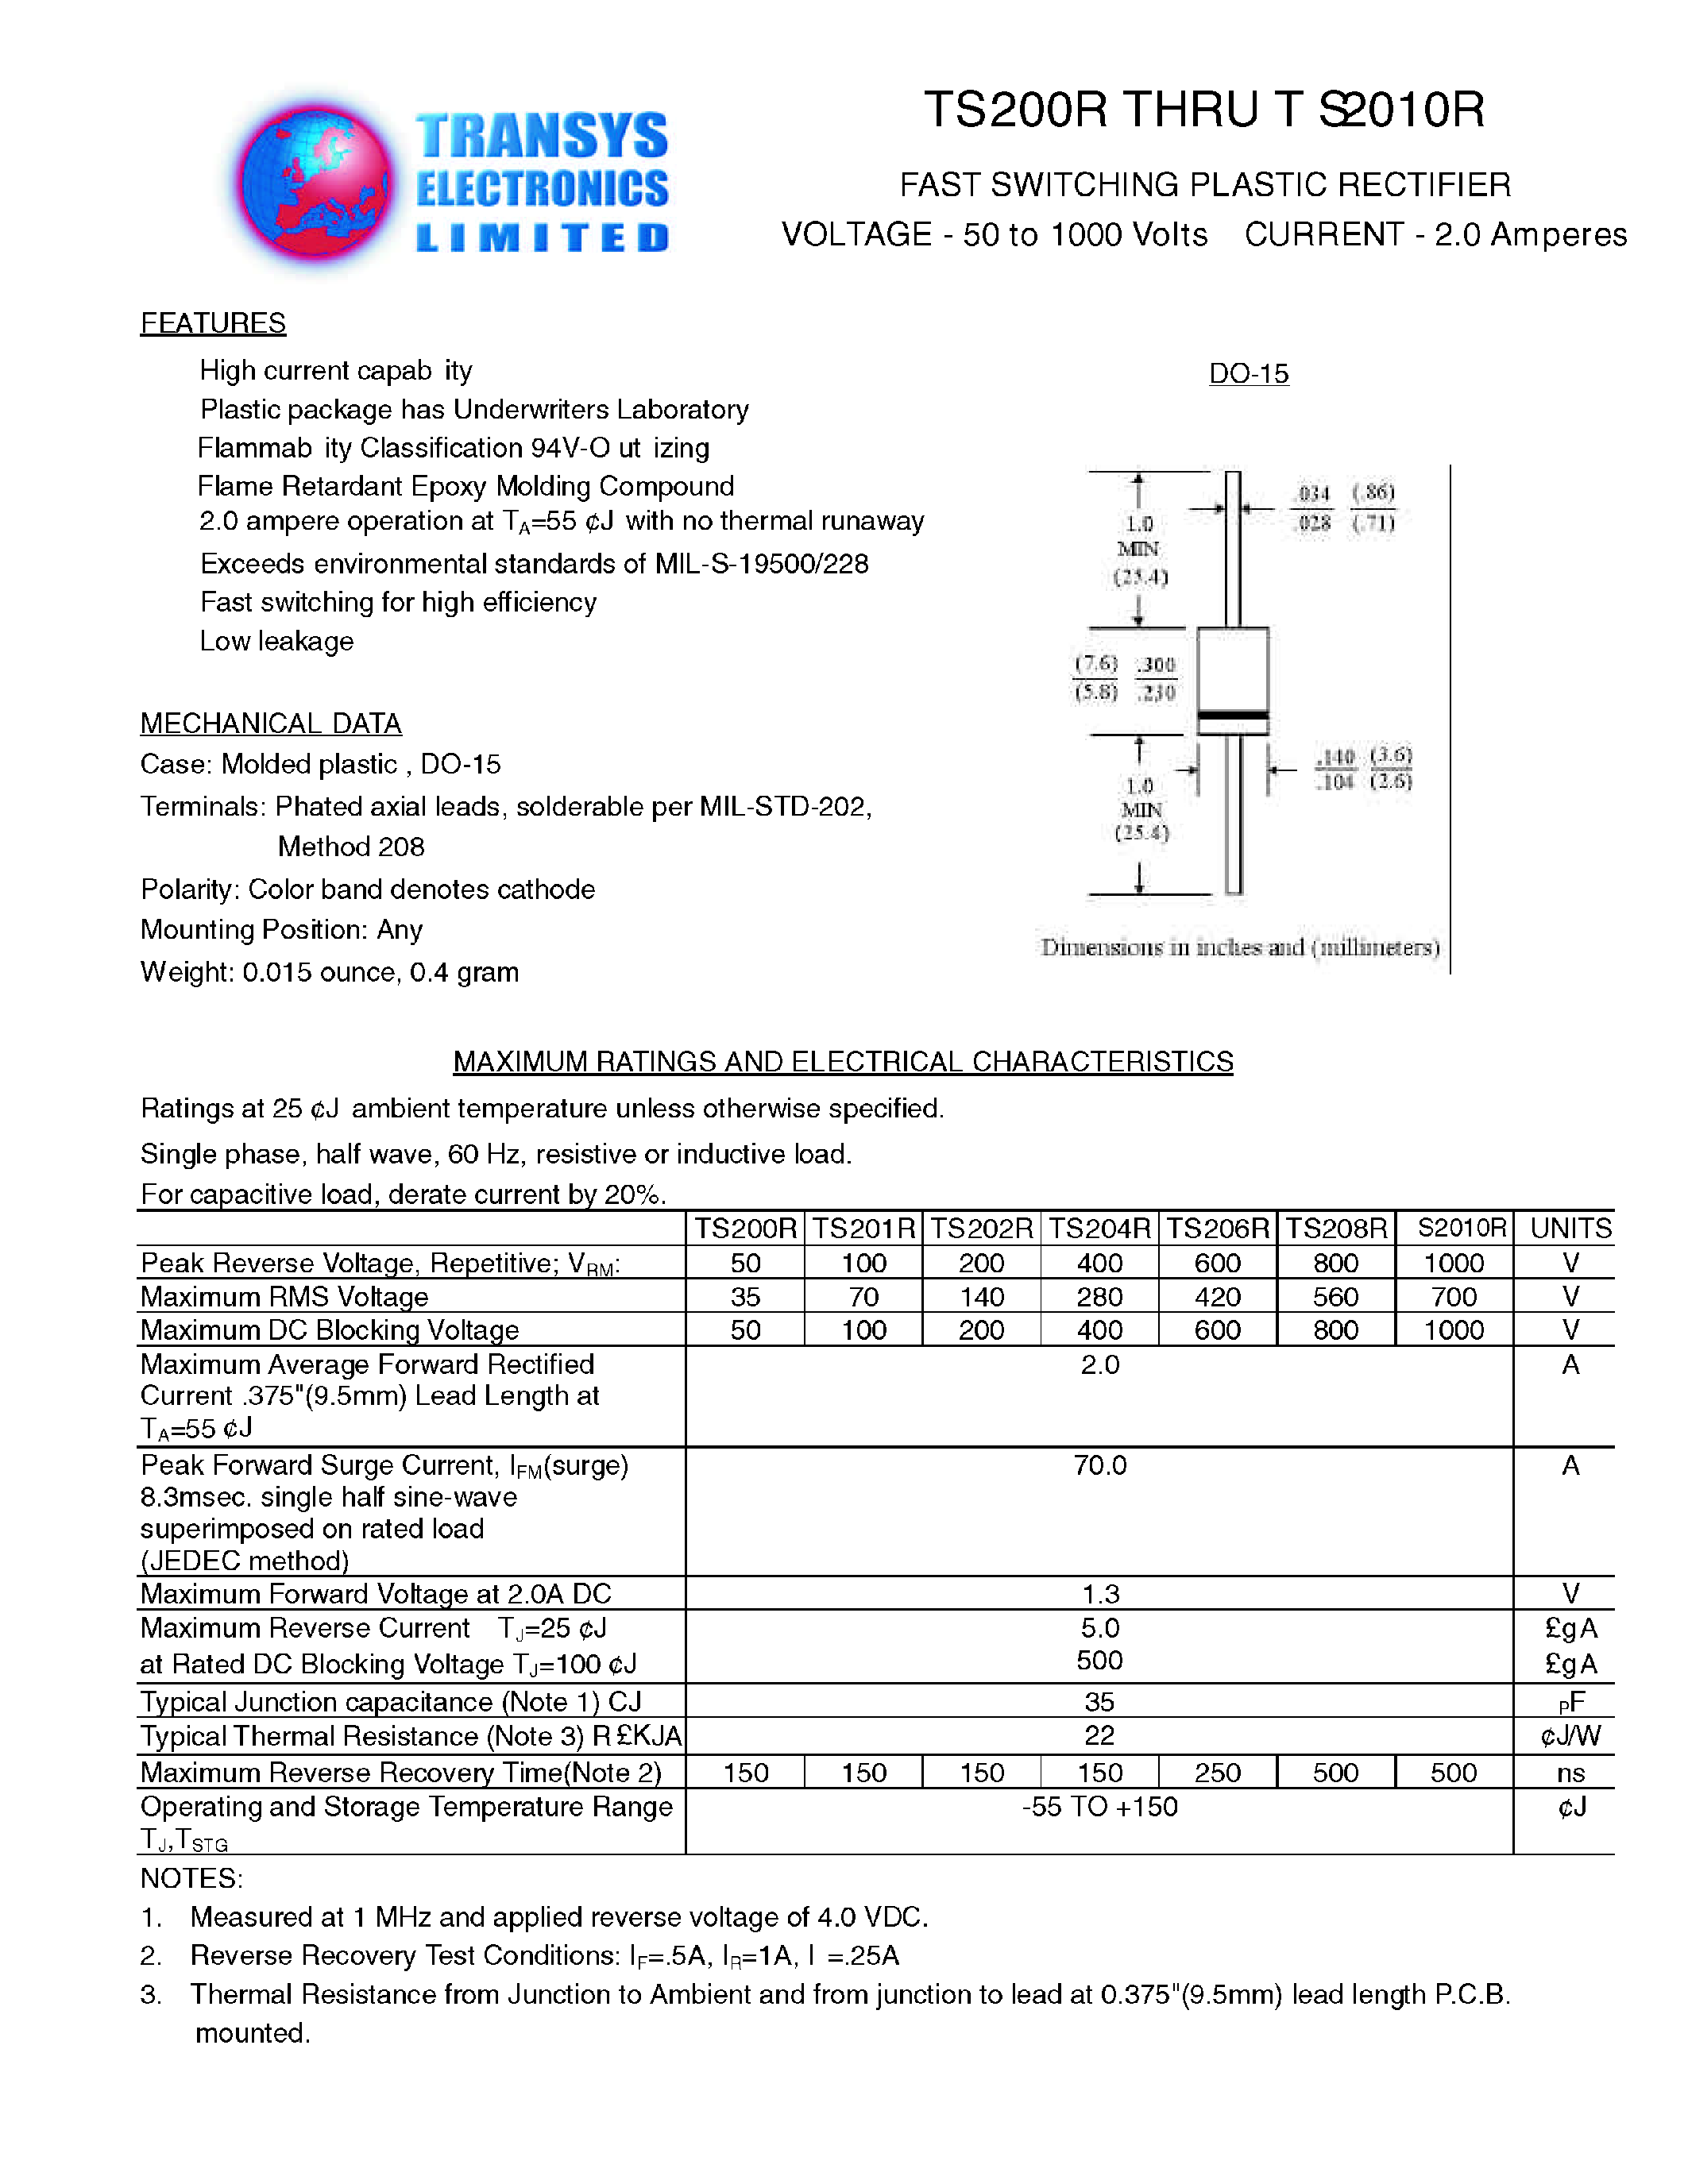 Datasheet TS208R - FAST SWITCHIING RECTIFIER(Reverse Voltage - 50 to 1000 Volts/ Current - 2.0Ampere) page 1